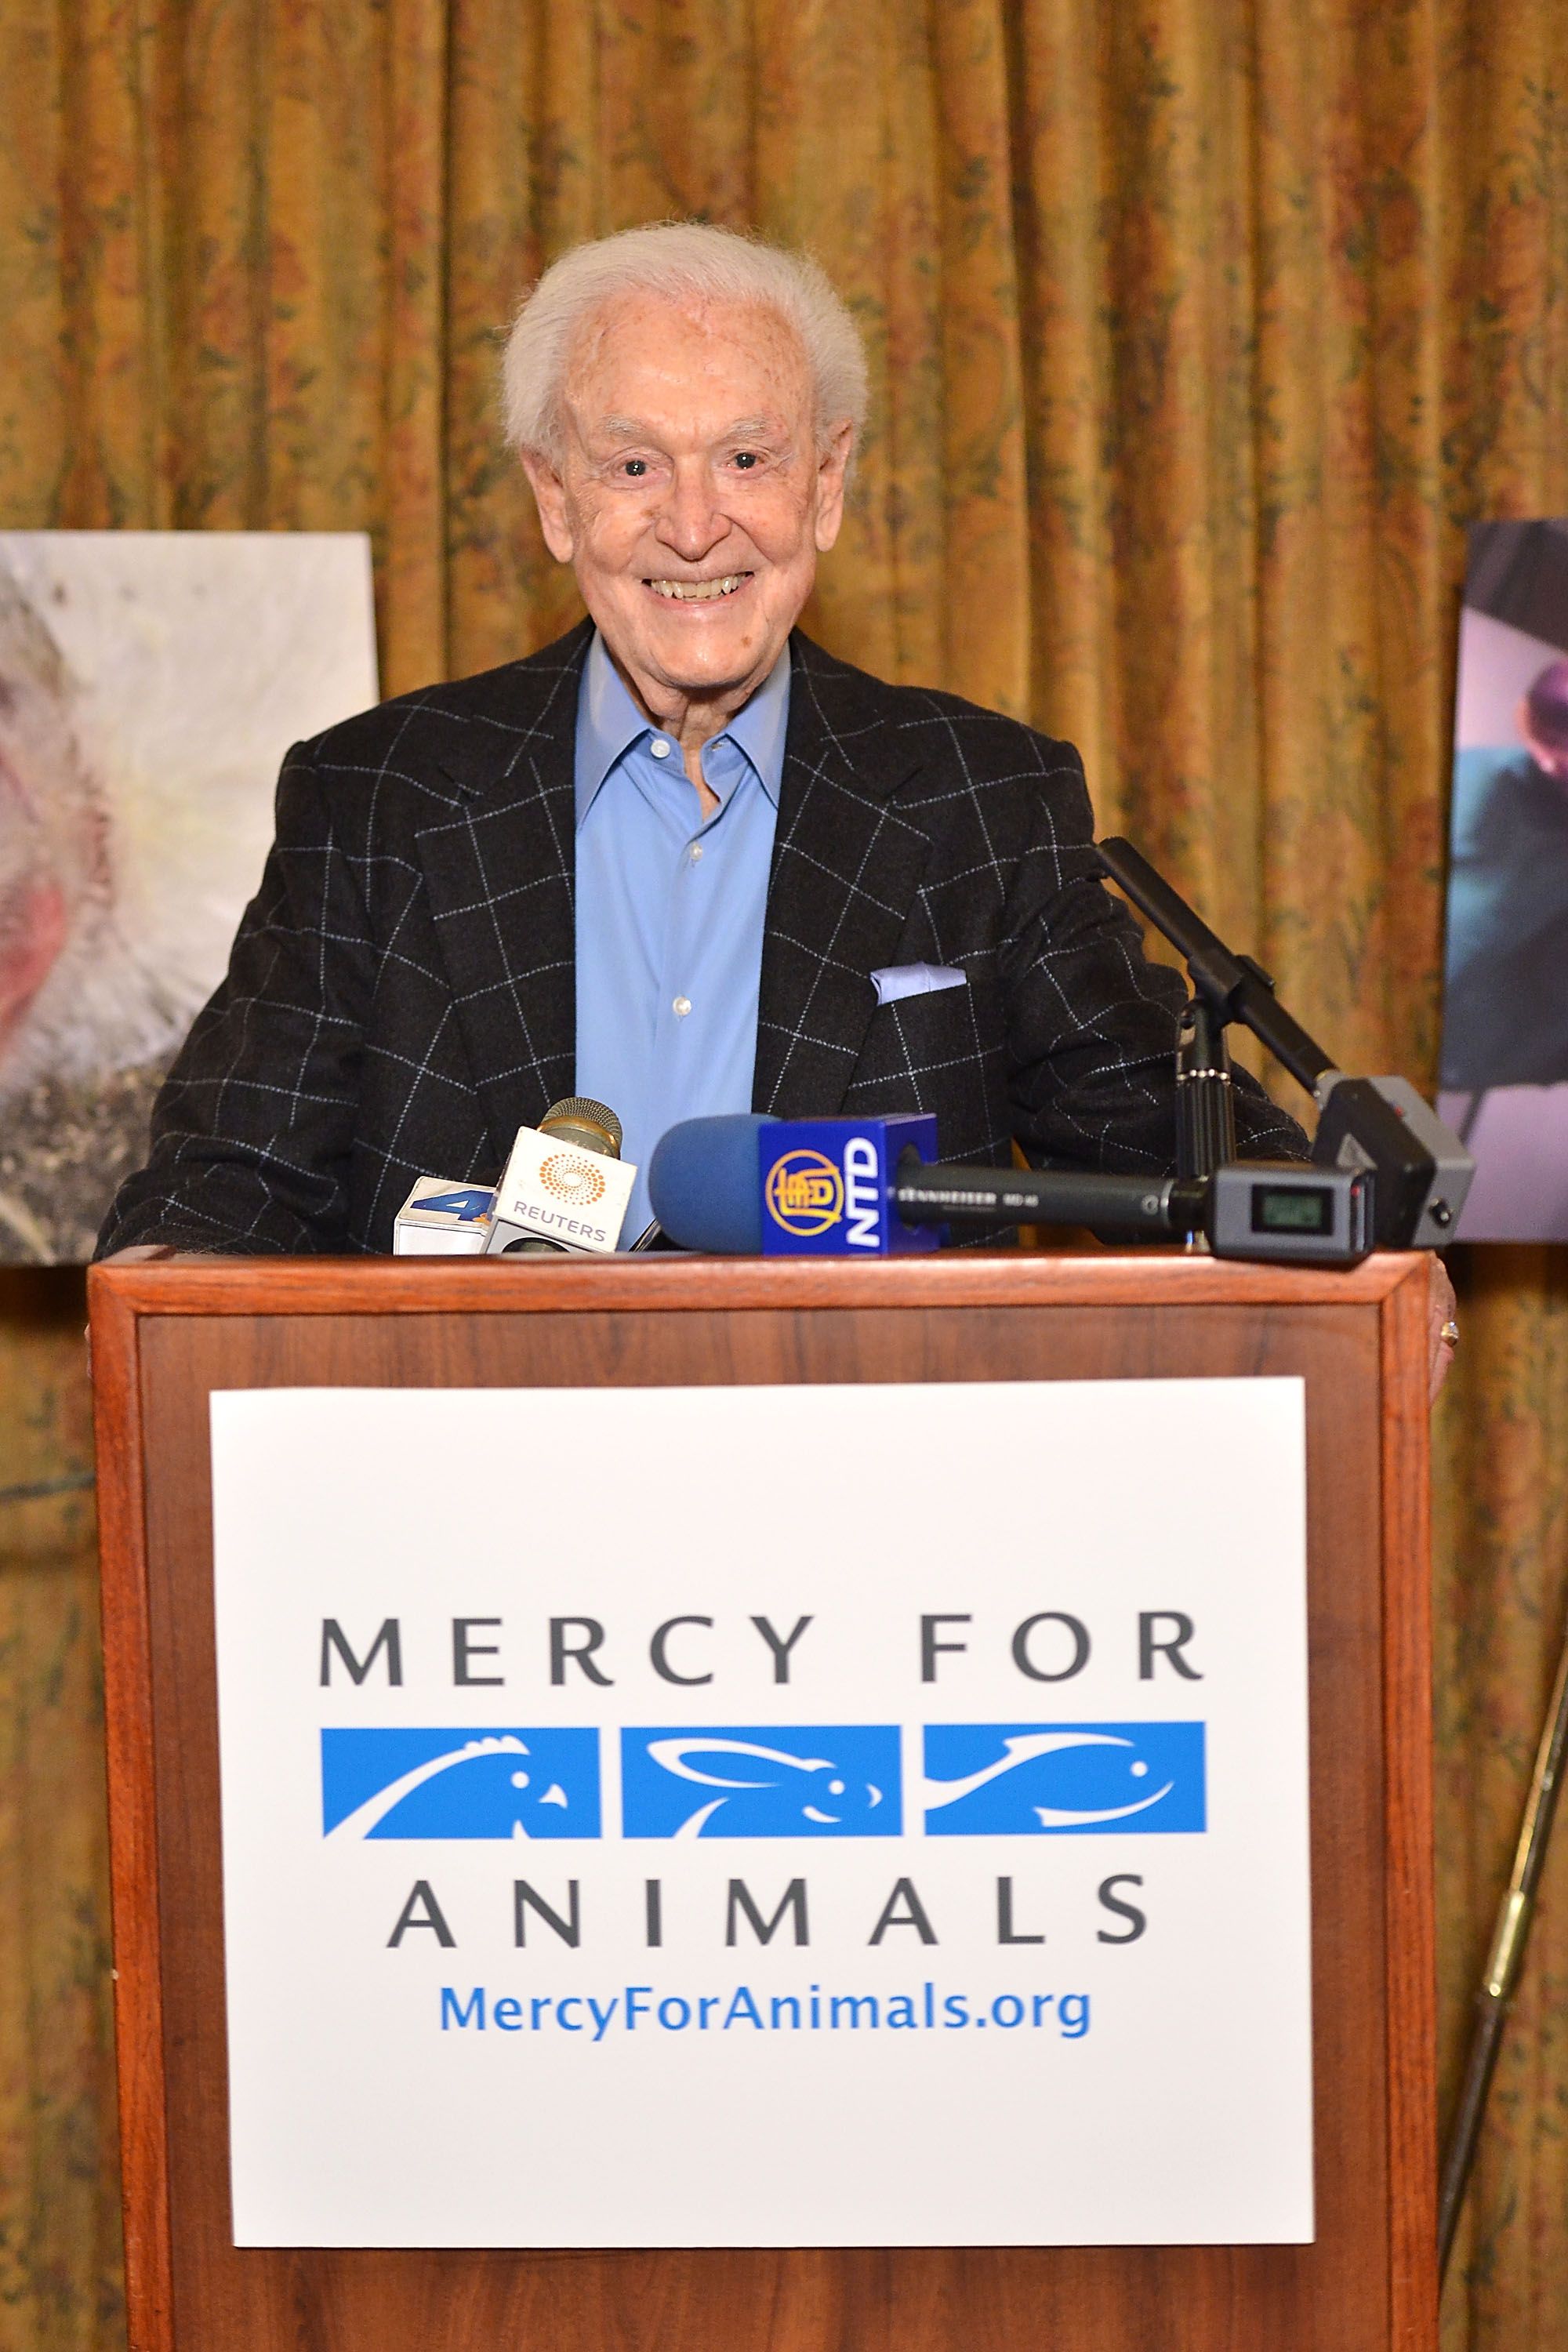 Bob Barker during the Mercy for Animals announcement at Millennium Biltmore Hotel on June 17, 2015, in Los Angeles, California | Source: Getty Images